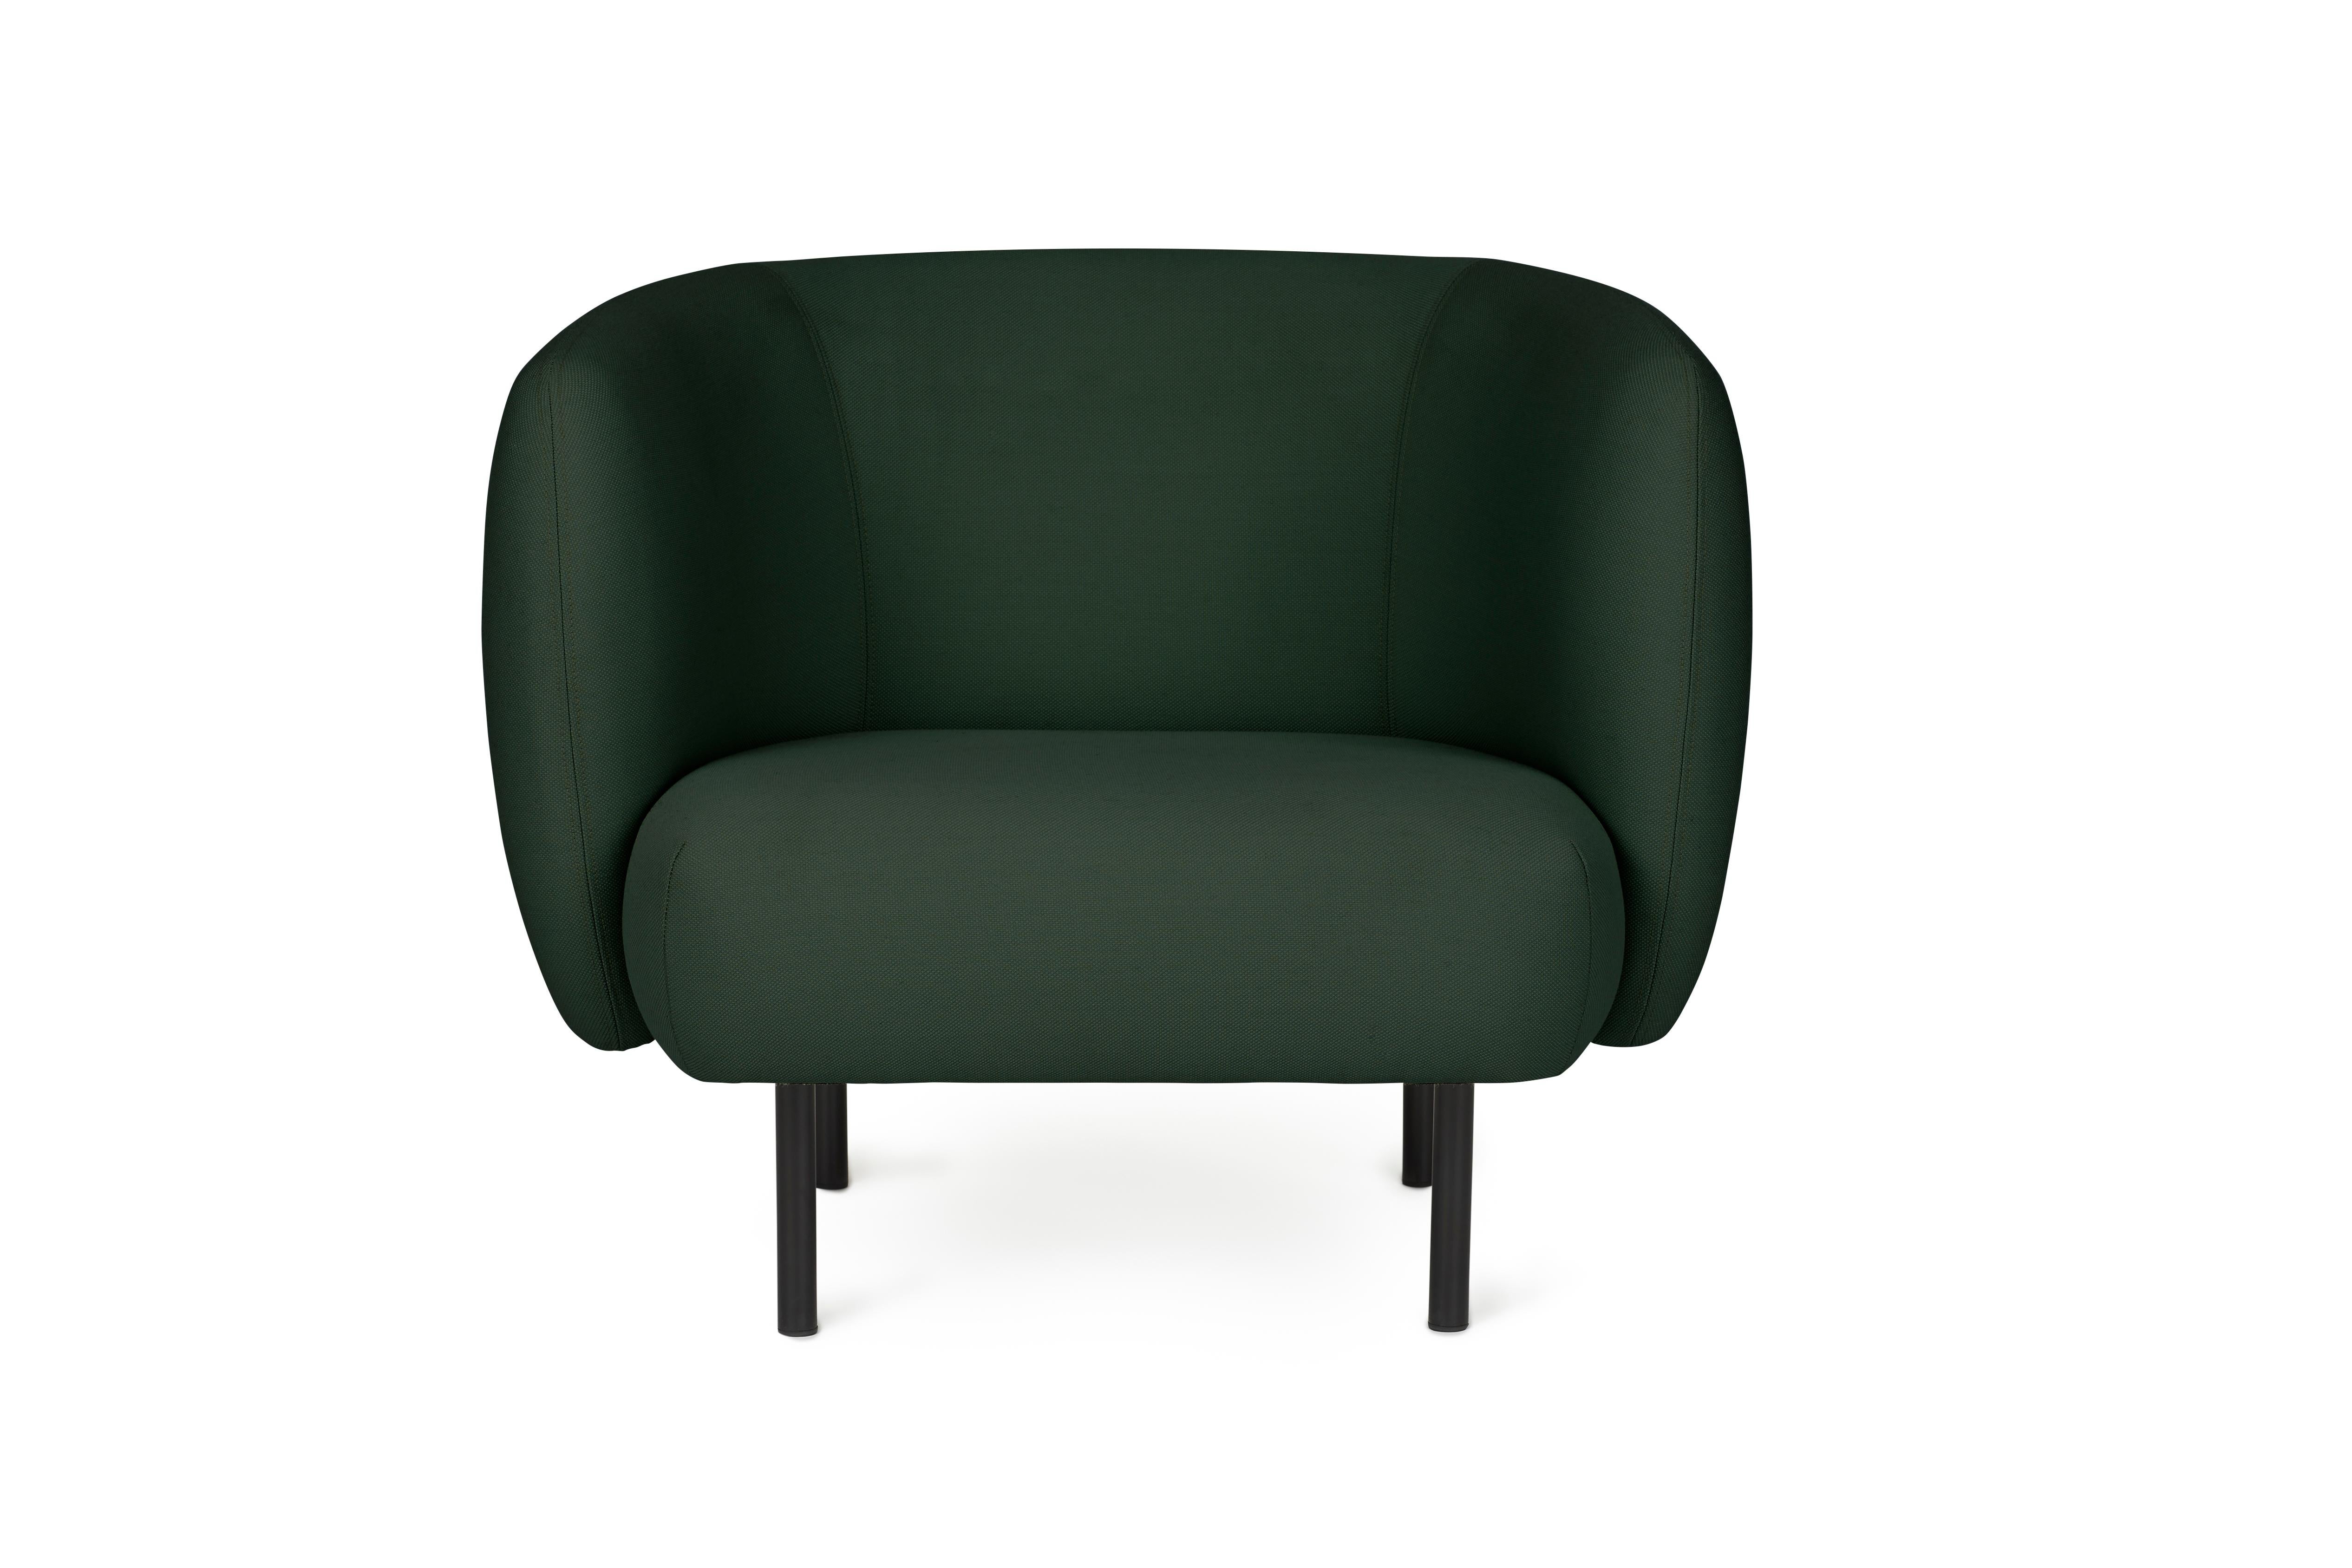 For Sale: Green (Steelcut 975) Cape Lounge Chair, by Charlotte Høncke from Warm Nordic